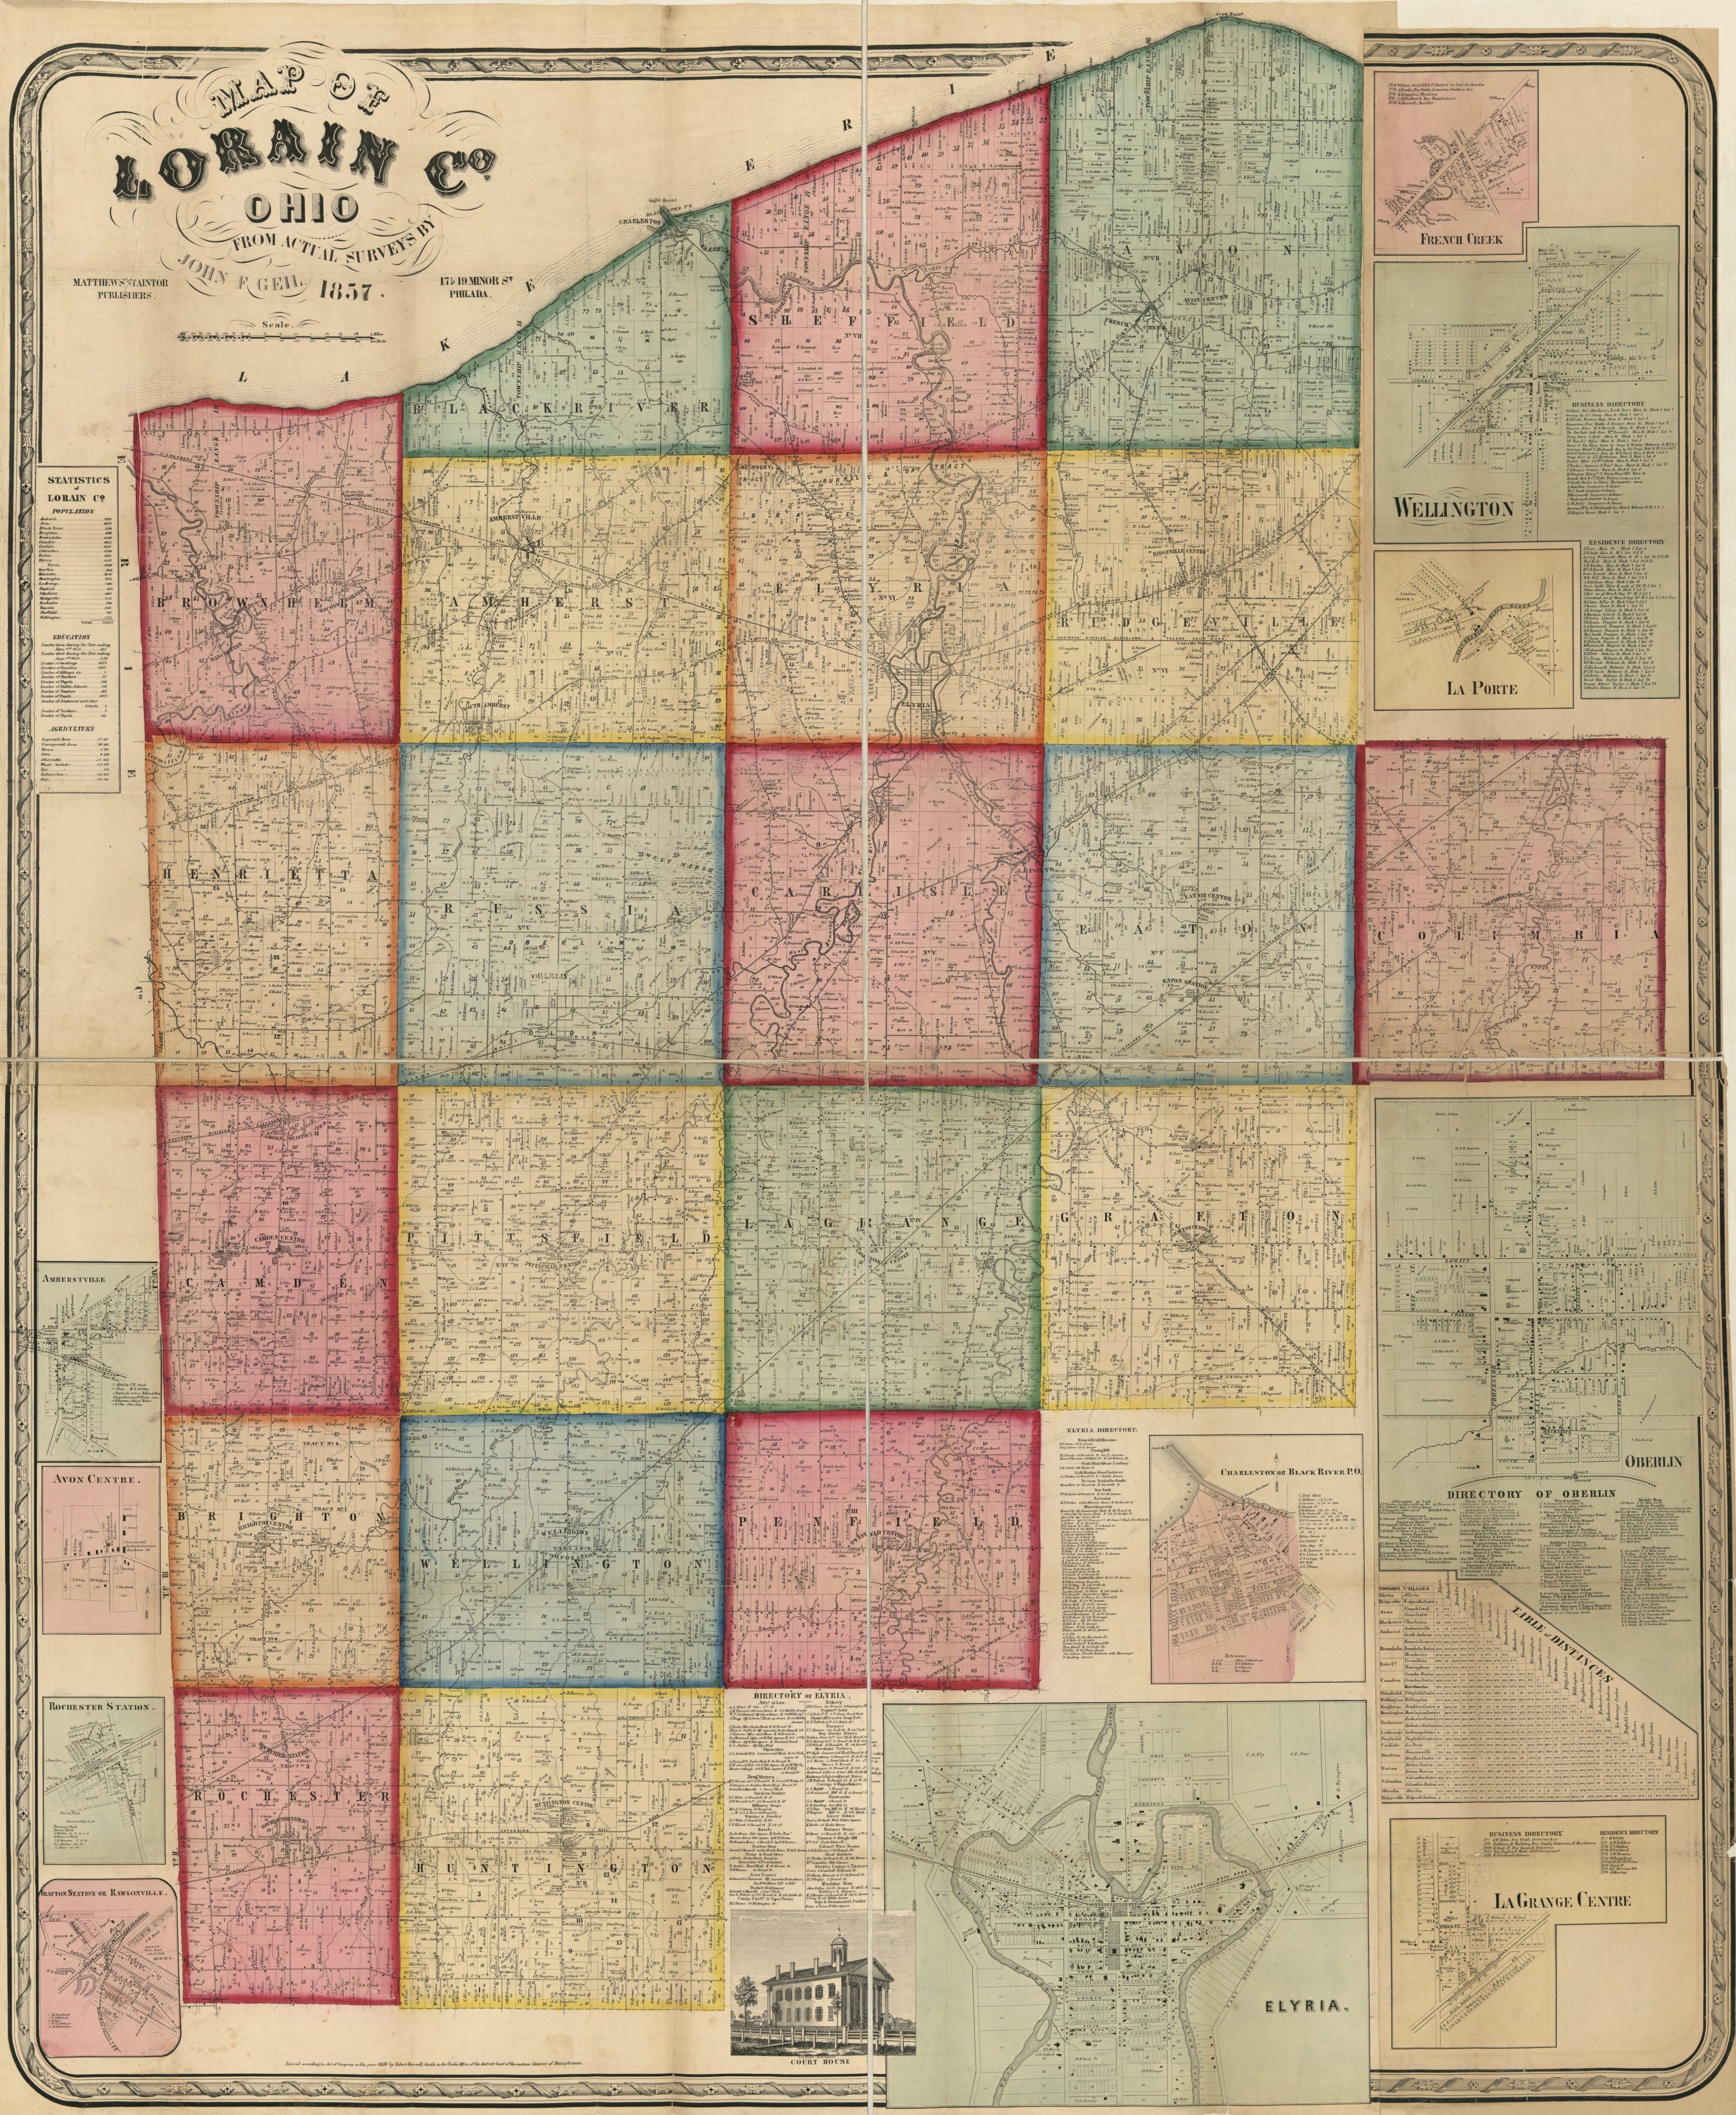 This old map of Map of Lorain Co., Ohio from 1857 was created by John F. Geil in 1857